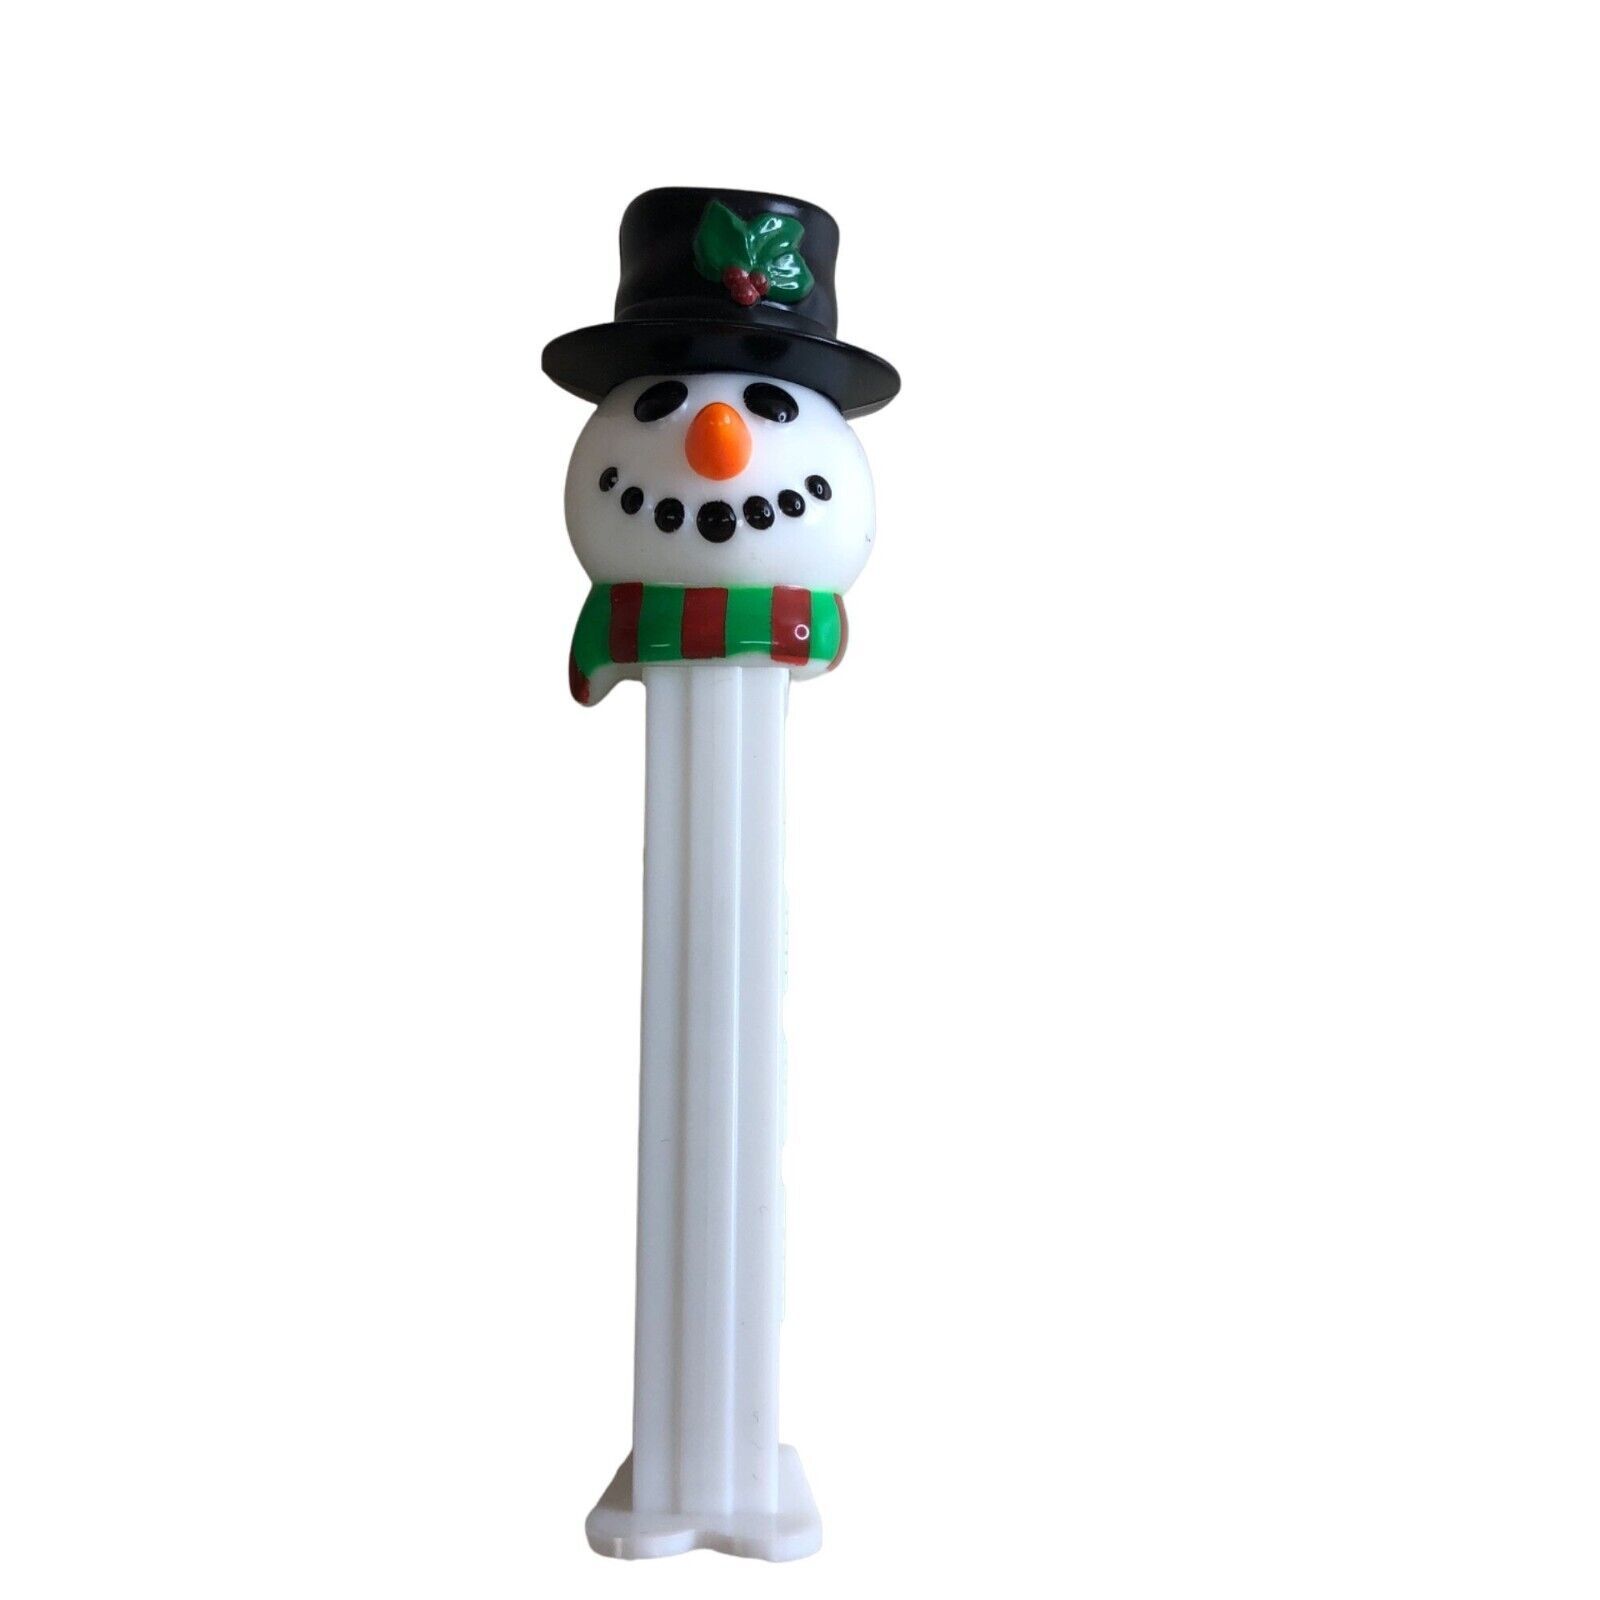 SNOWMAN PEZ CANDY DISPENSER 2002 FEET WHITE & BLACK HOLIDAY COLLECTORS Scarf - $6.80